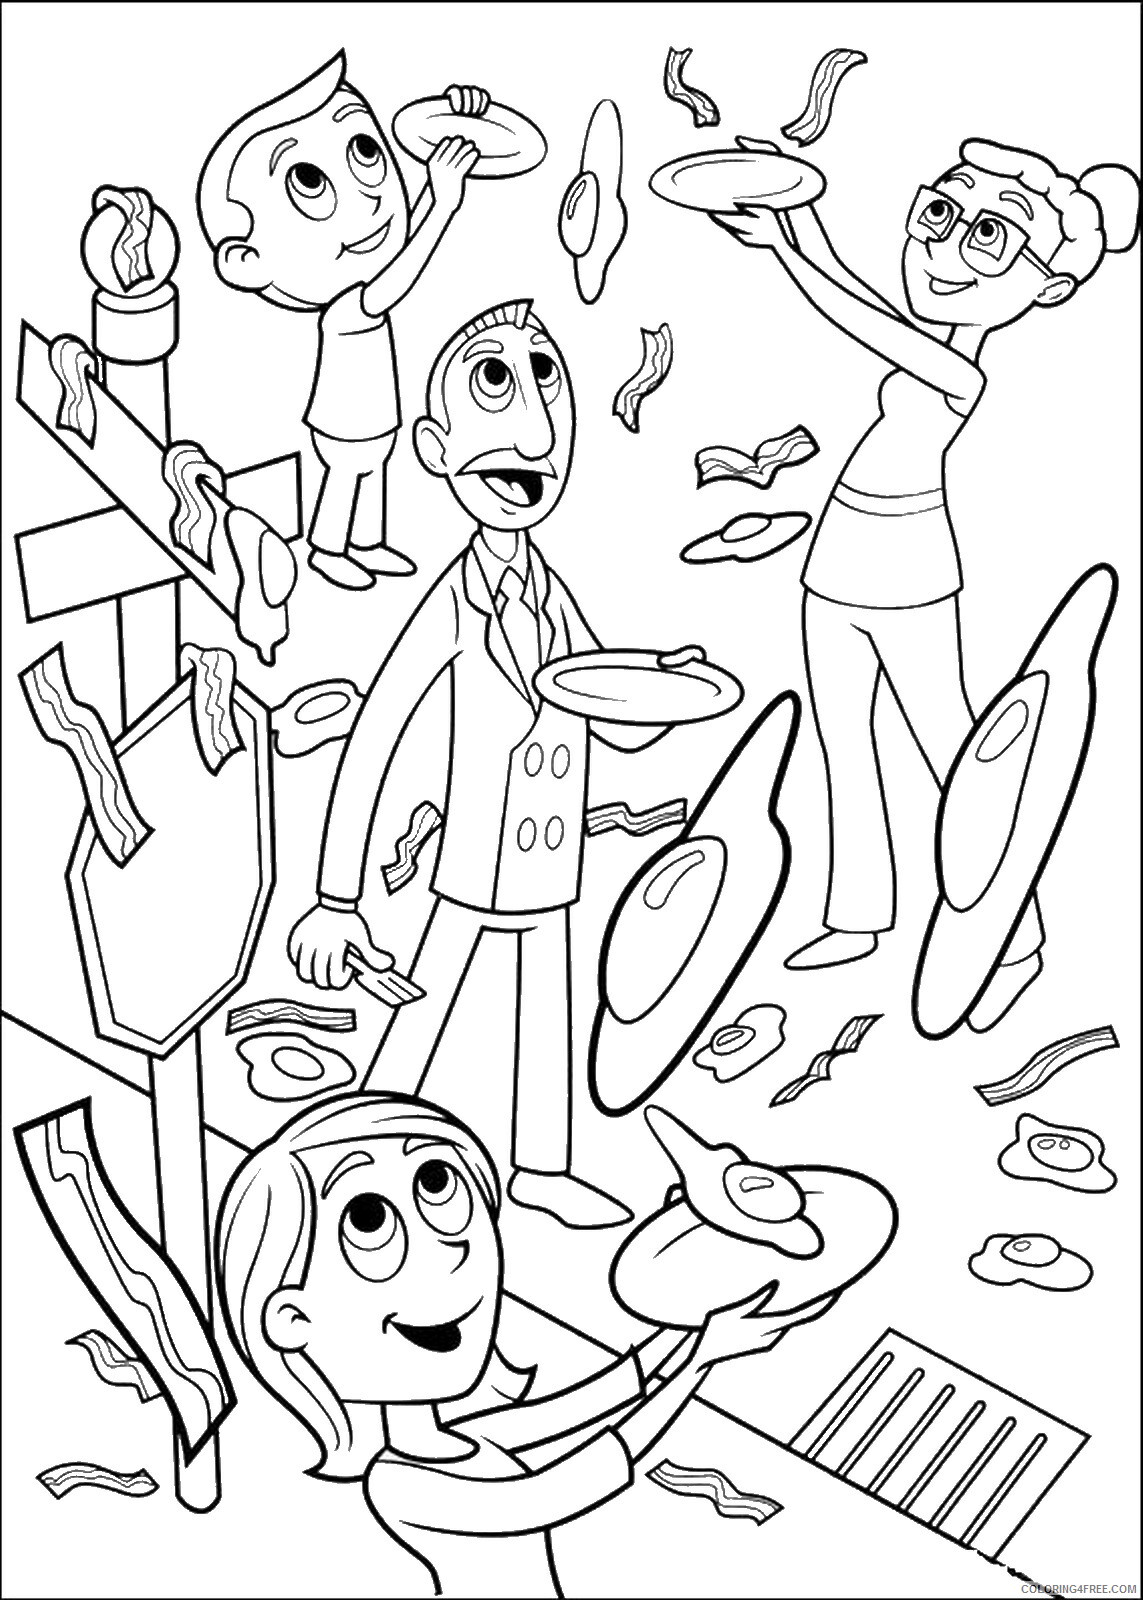 Cloudy with a Chance of Meatballs Coloring Pages TV Film Printable 2020 02232 Coloring4free